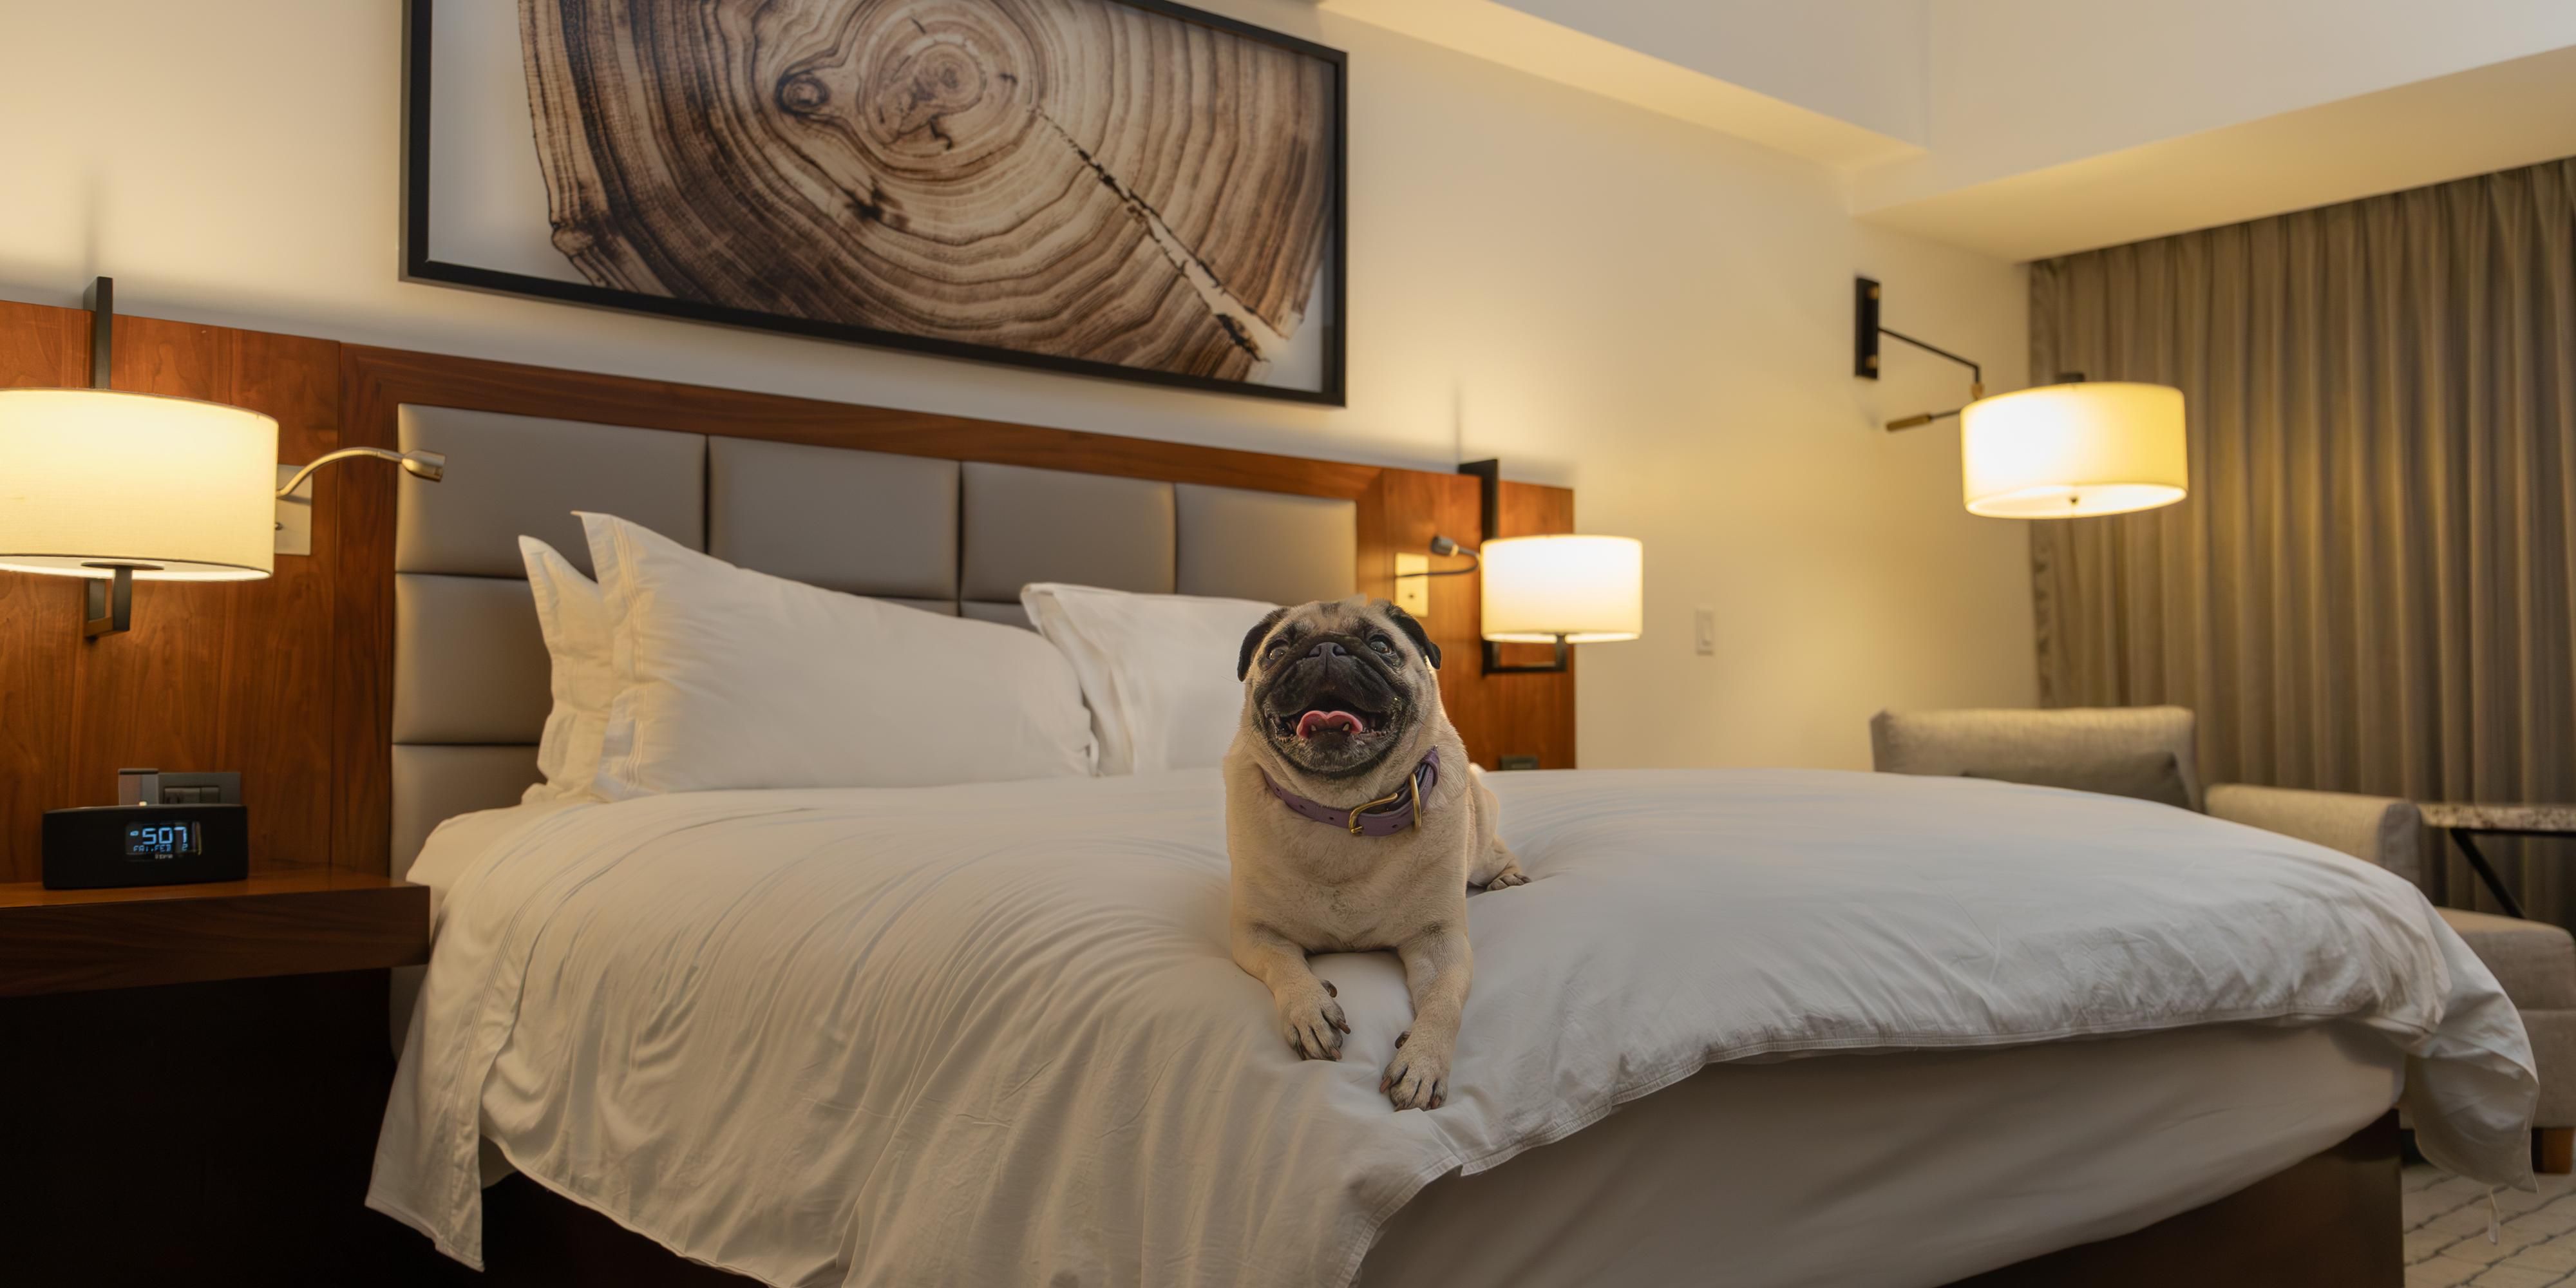 "Welcome to our pet-friendly hotel, where every tail wags with delight! Enjoy a comfortable stay with your furry companion by your side. We provide spacious accommodations, and a warm welcome to both you and your four-legged friends. Book your stay now and experience the ultimate pet-friendly hospitality!